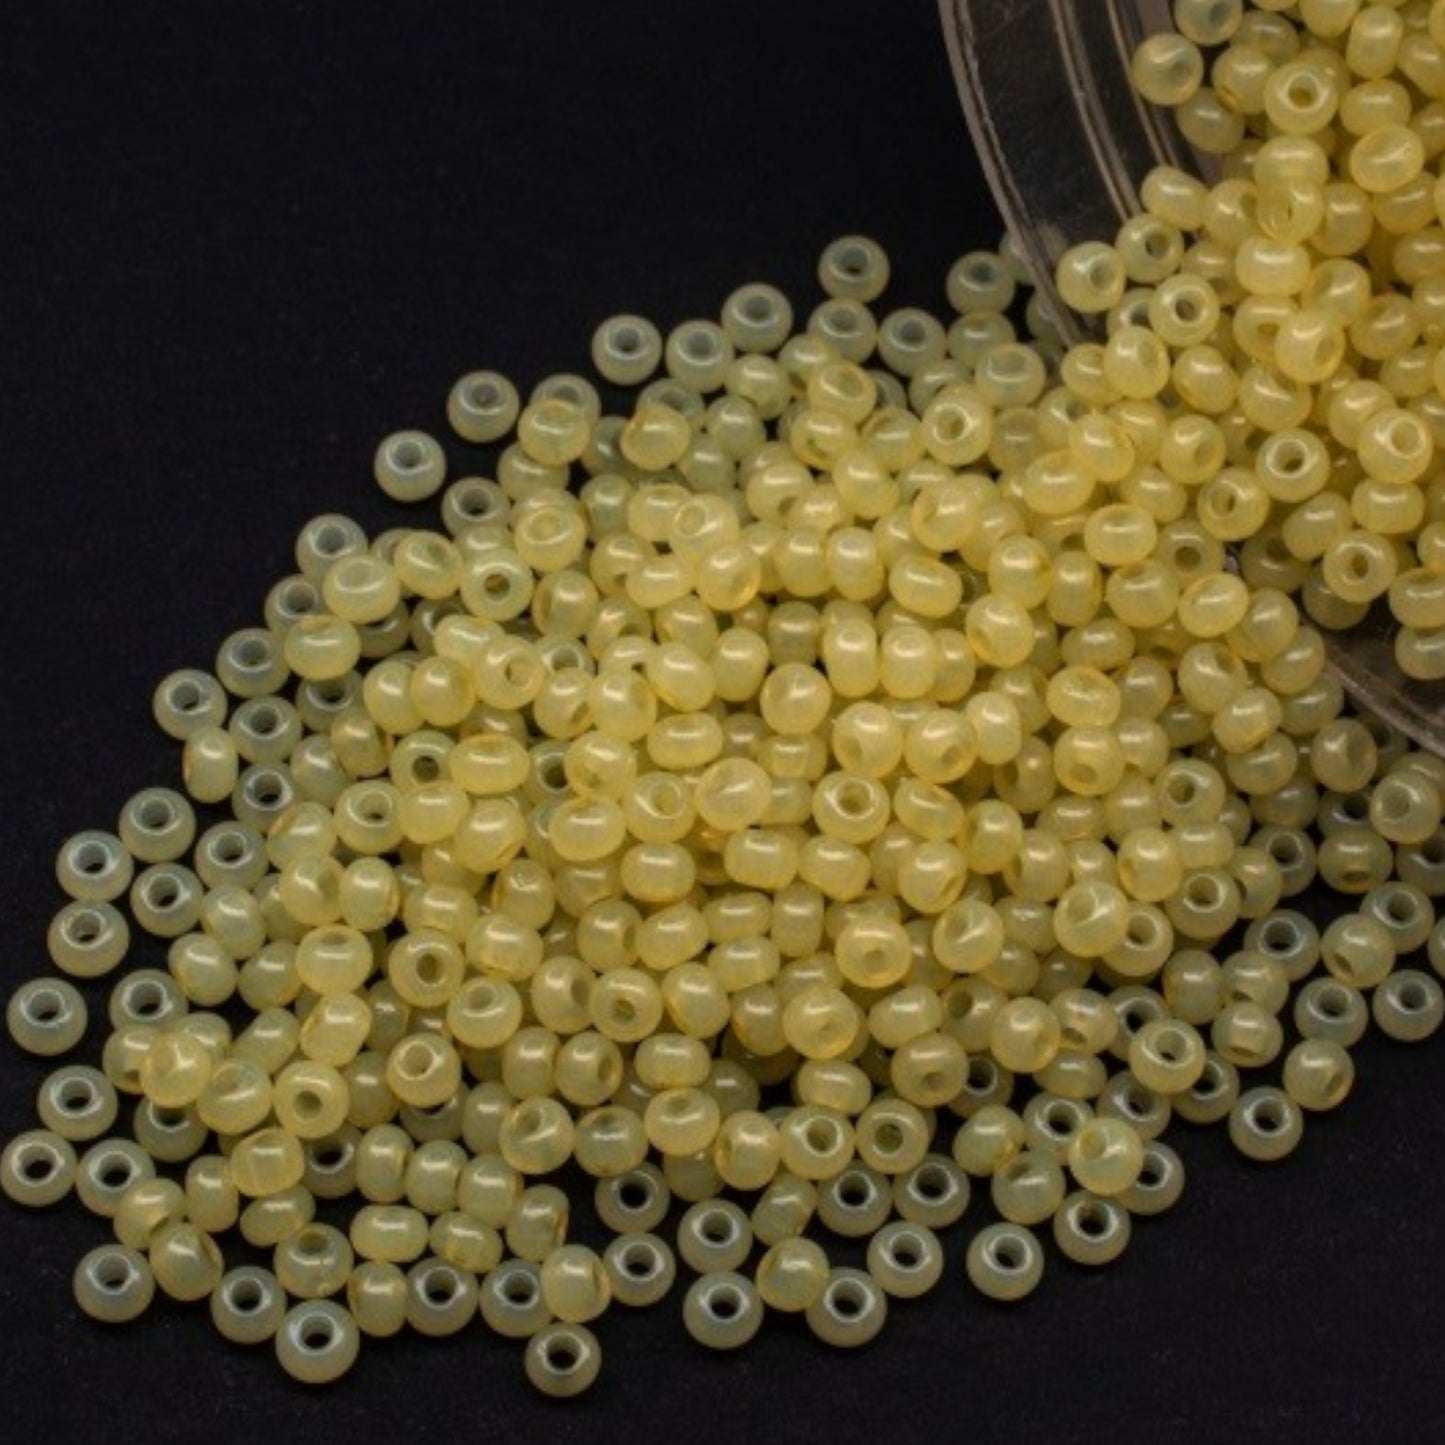 10/0 02651 Preciosa Seed Beads. Olive alabaster - Solgel dyed.